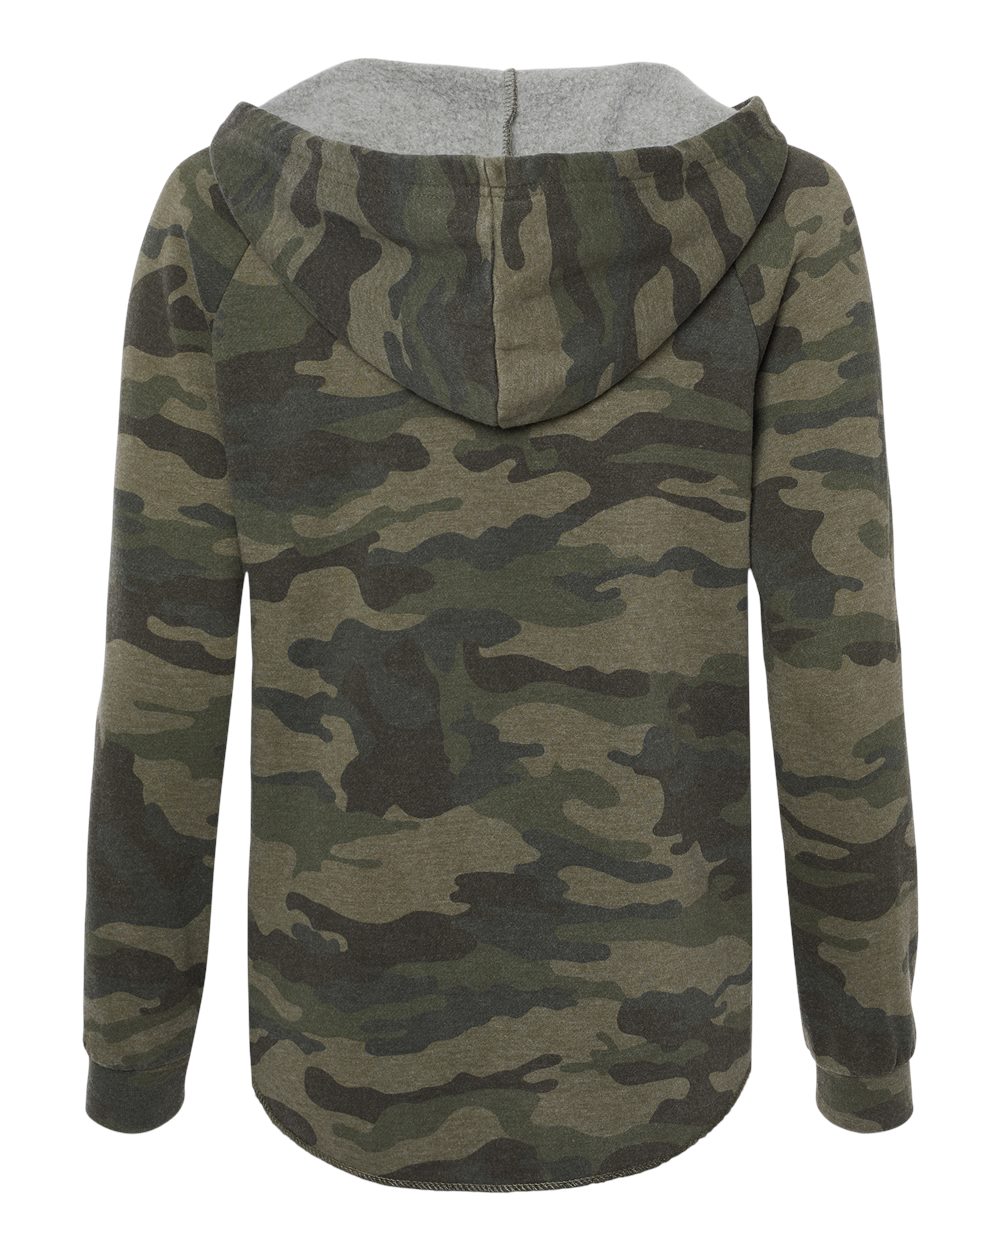 This is Home Women's Camo Hoodie